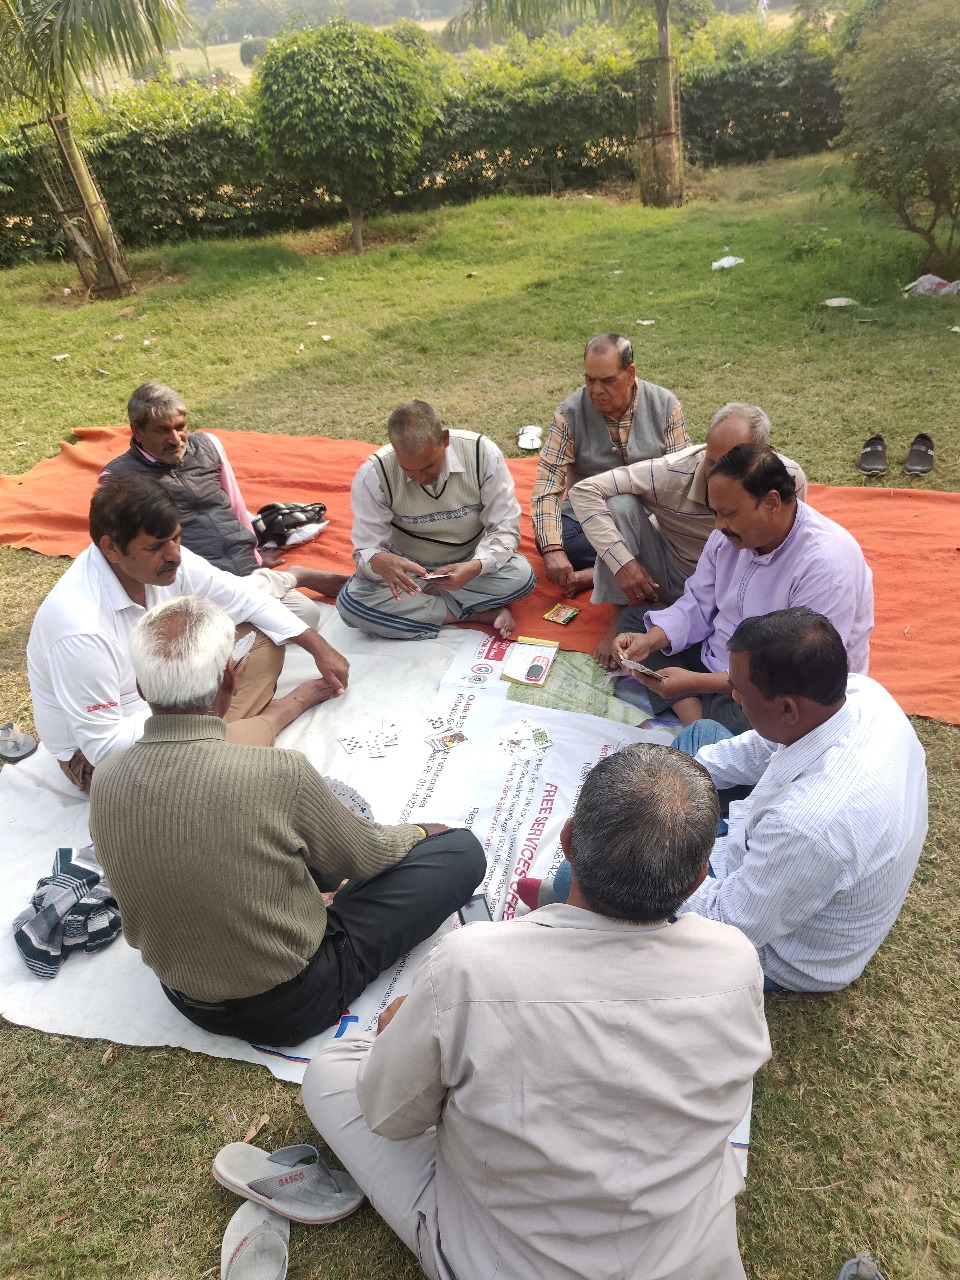 Men playing cards. Khirki village still has a strong sense of community and one can often spot people engaged in games or talking in public spaces. Credits: Ekta Chauhan